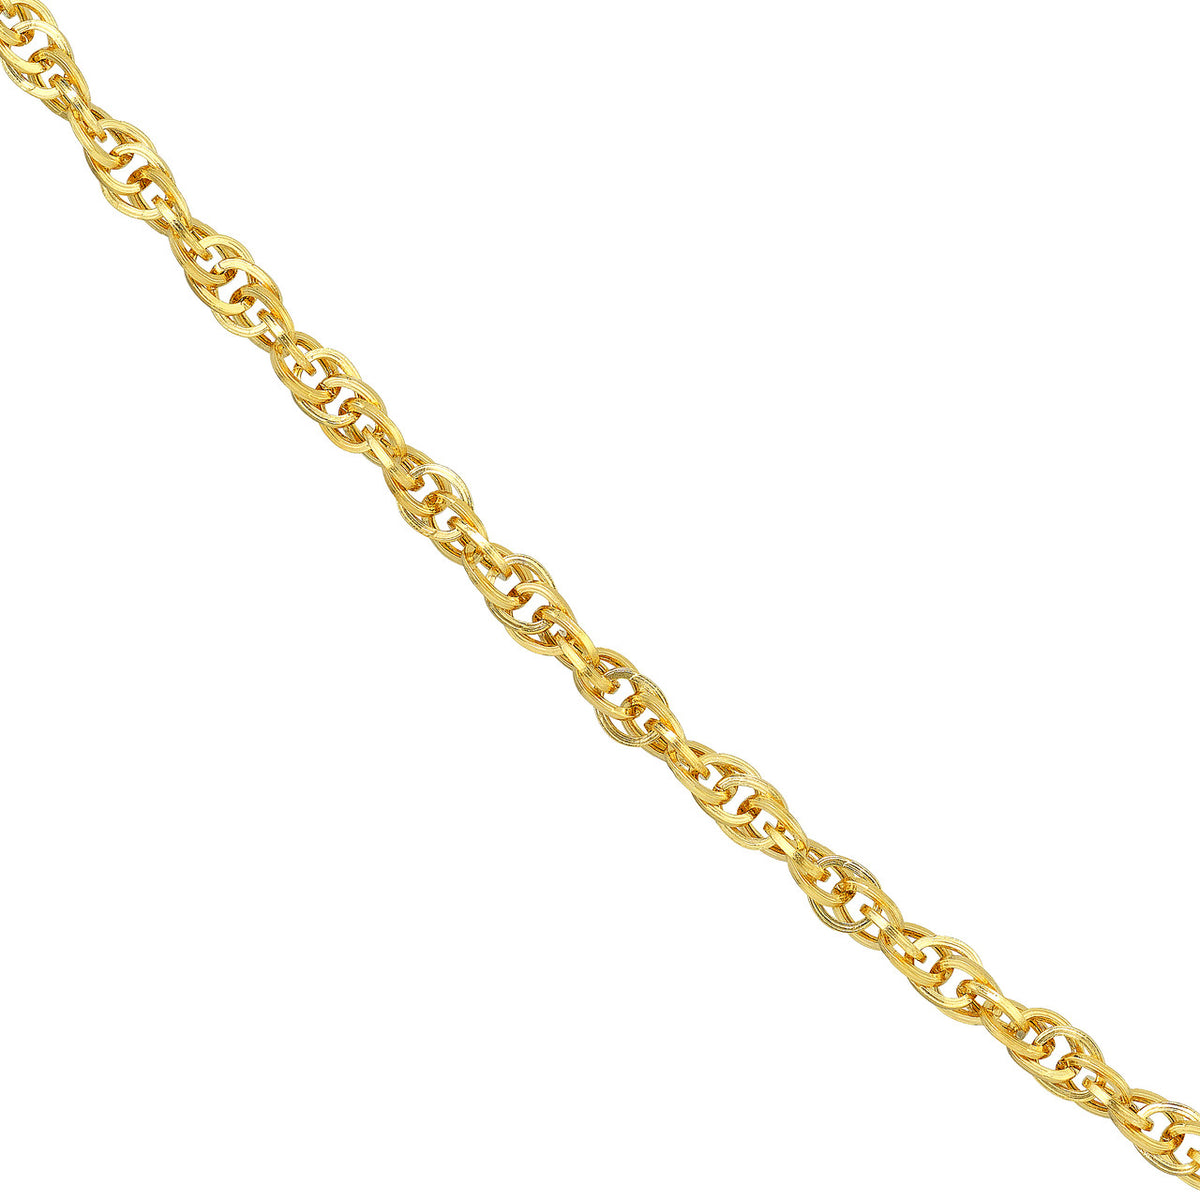 14K Yellow Gold or White Gold 2.6mm Designer Rope Chain Necklace with Lobster Lock